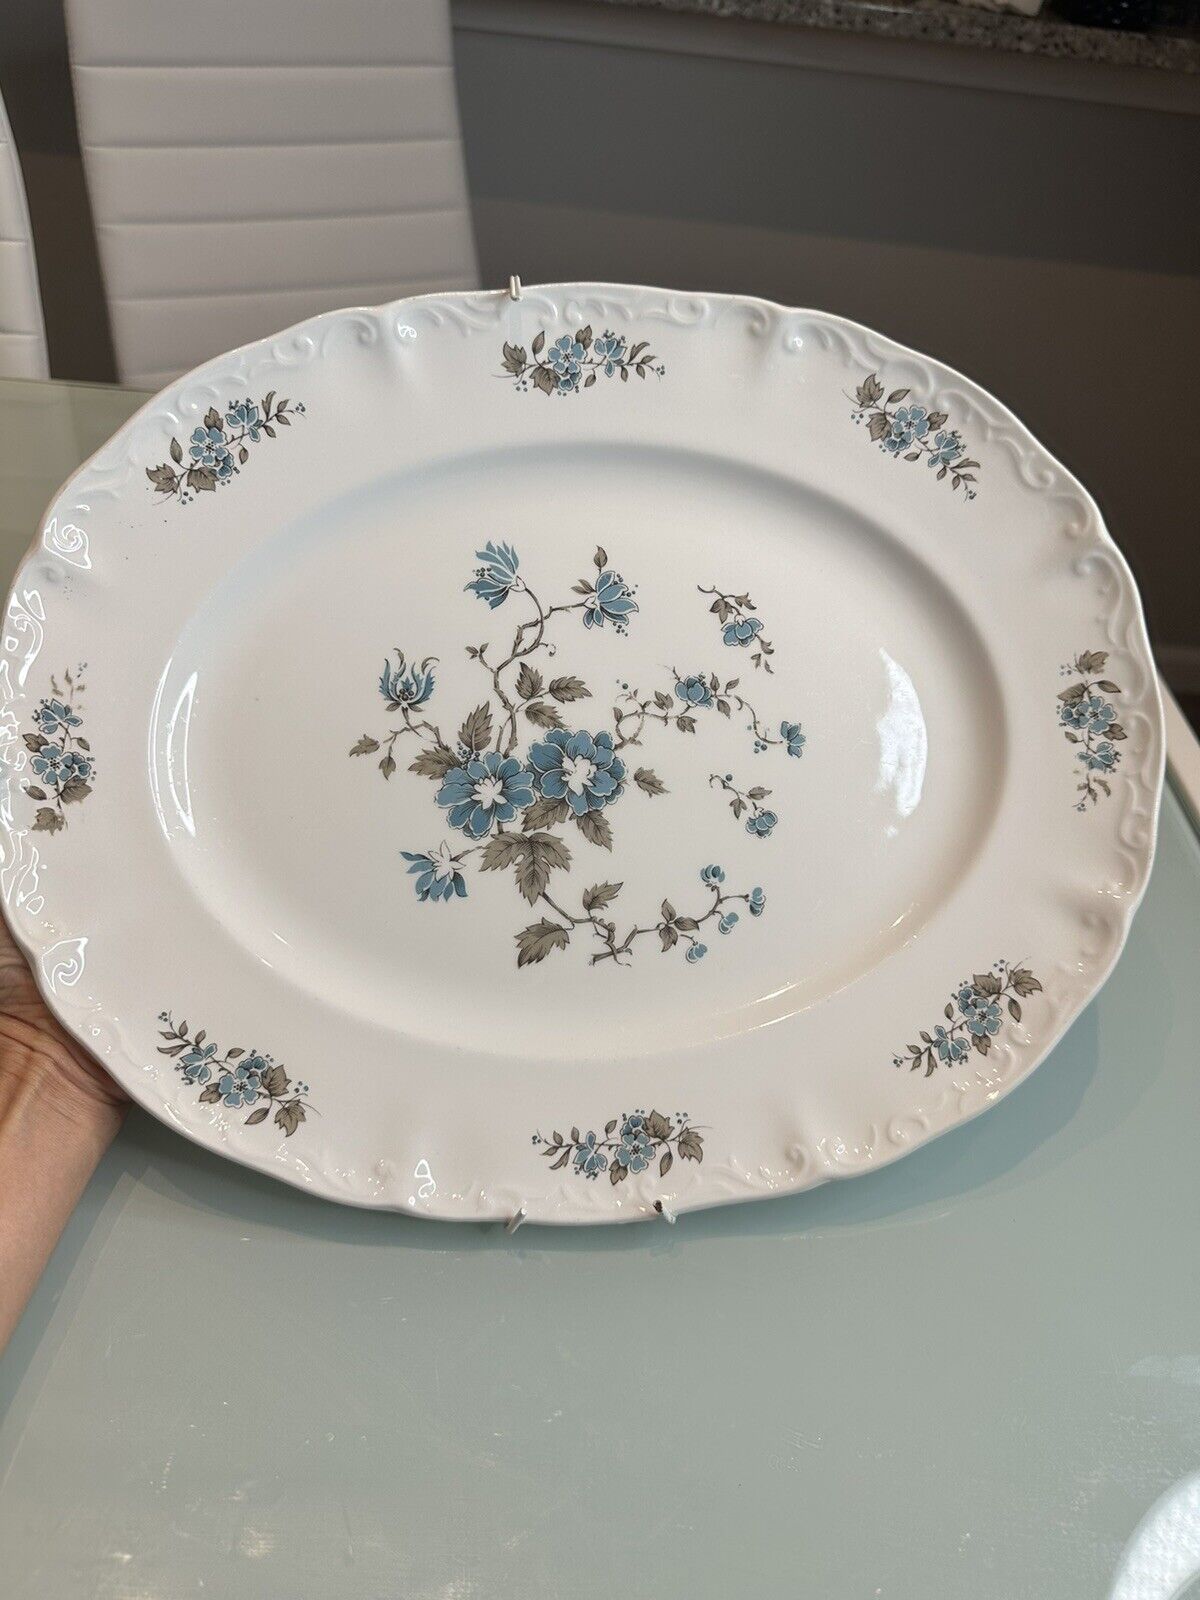 Blossomtime Staffordshire England Hand Decorated Ironstone 11x14 Plate Vintage